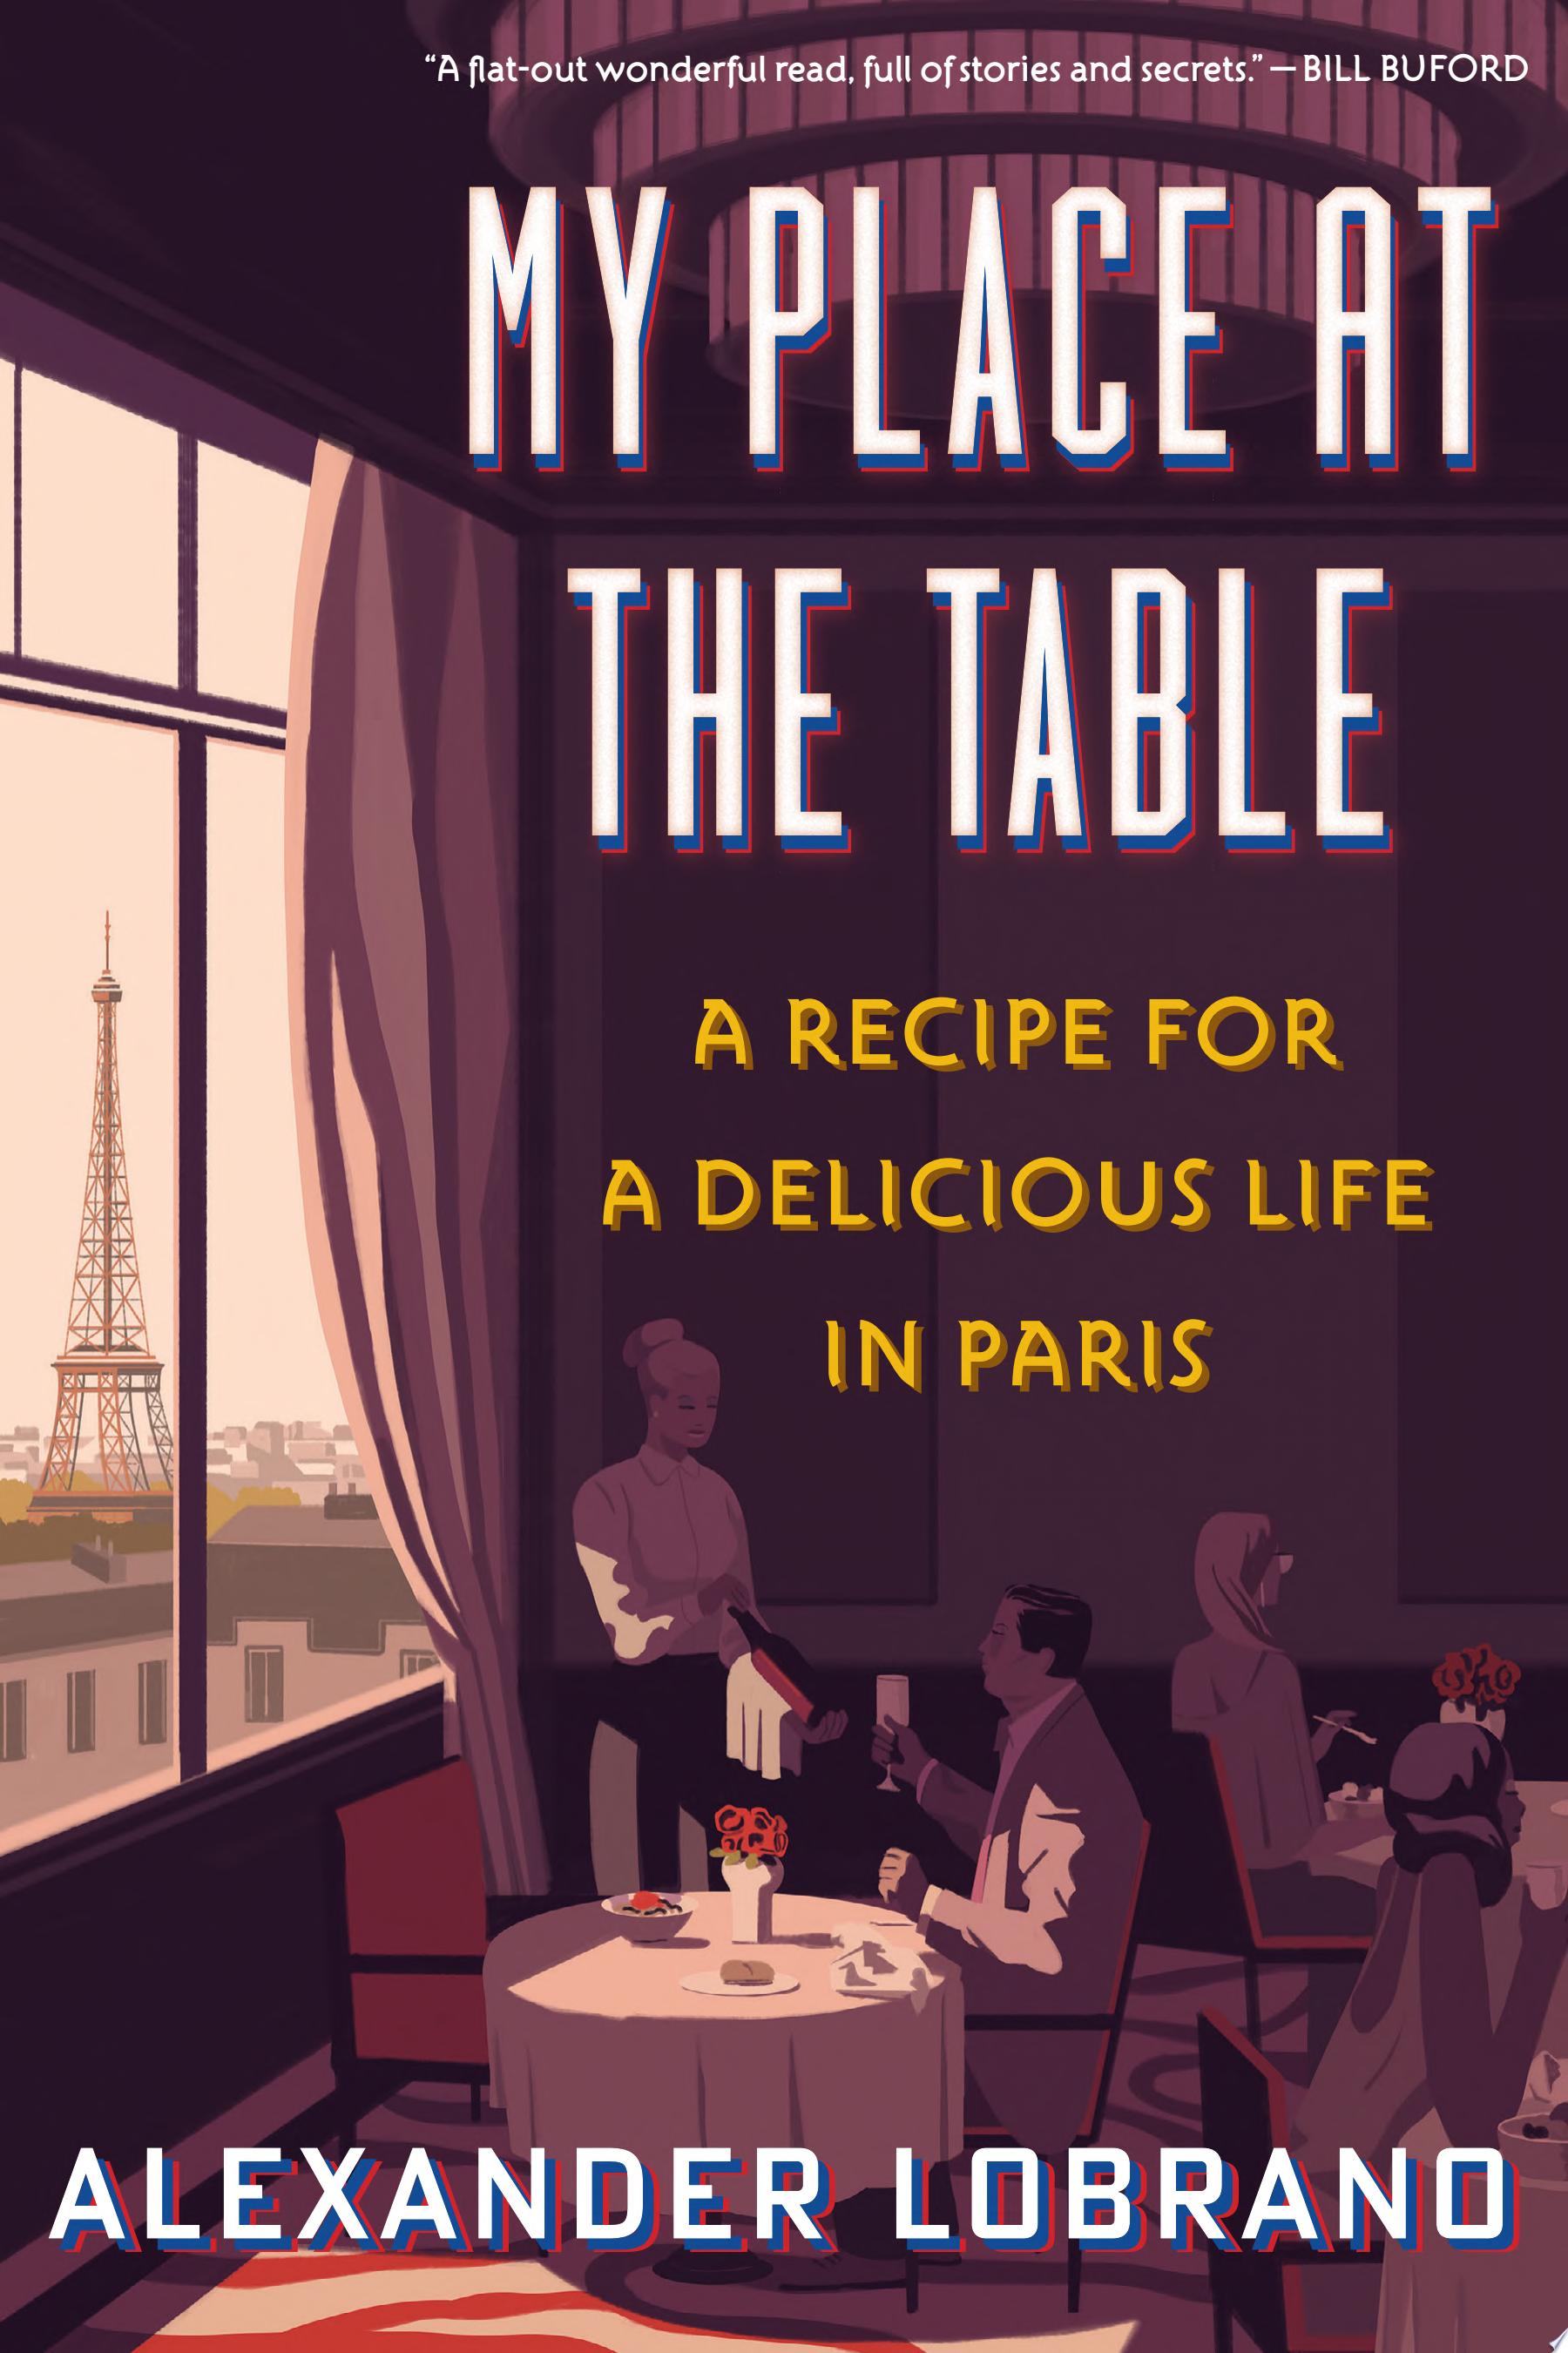 Image for "My Place at the Table"